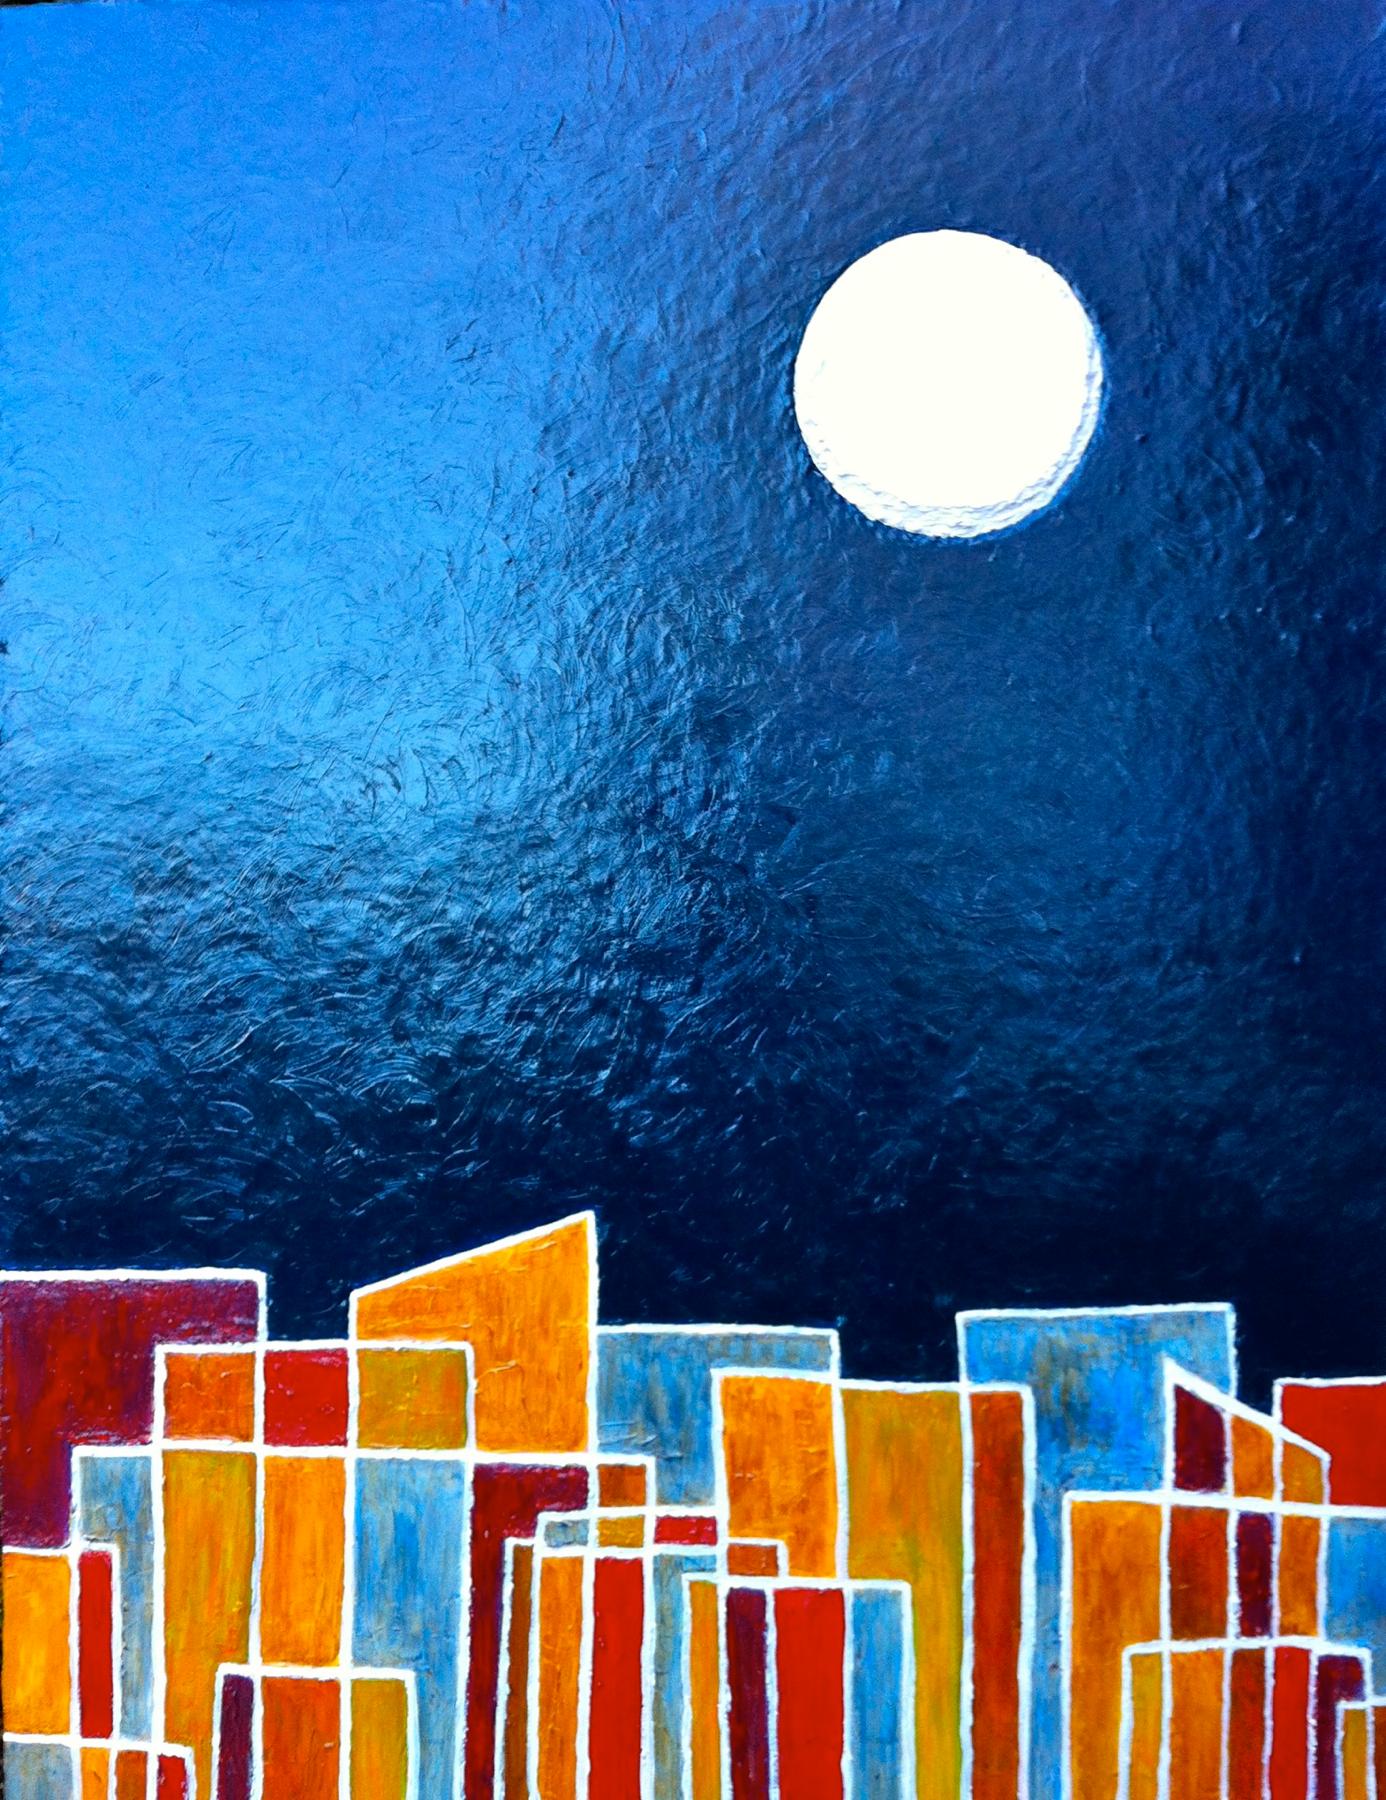 Image for entry 'Cityscape'